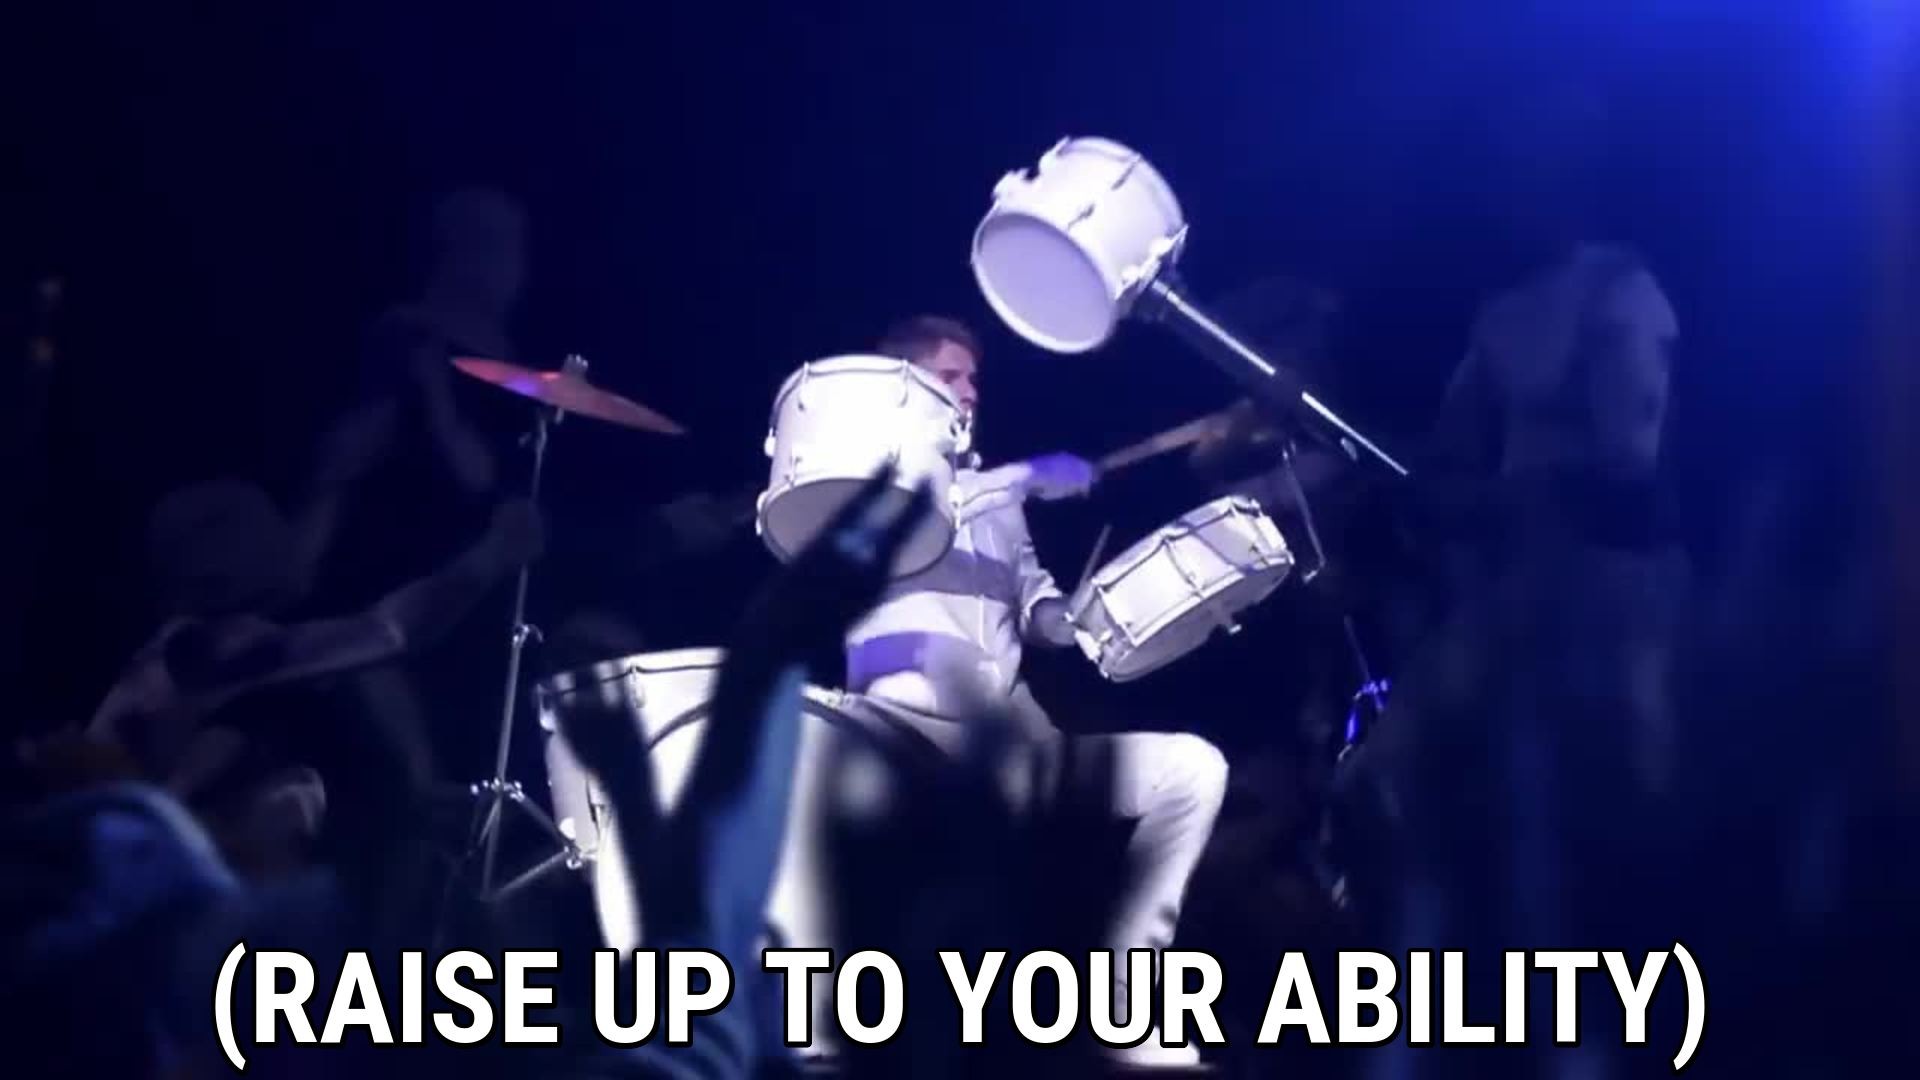 1920x1080 ... Foster the People (Raise up to your ability)